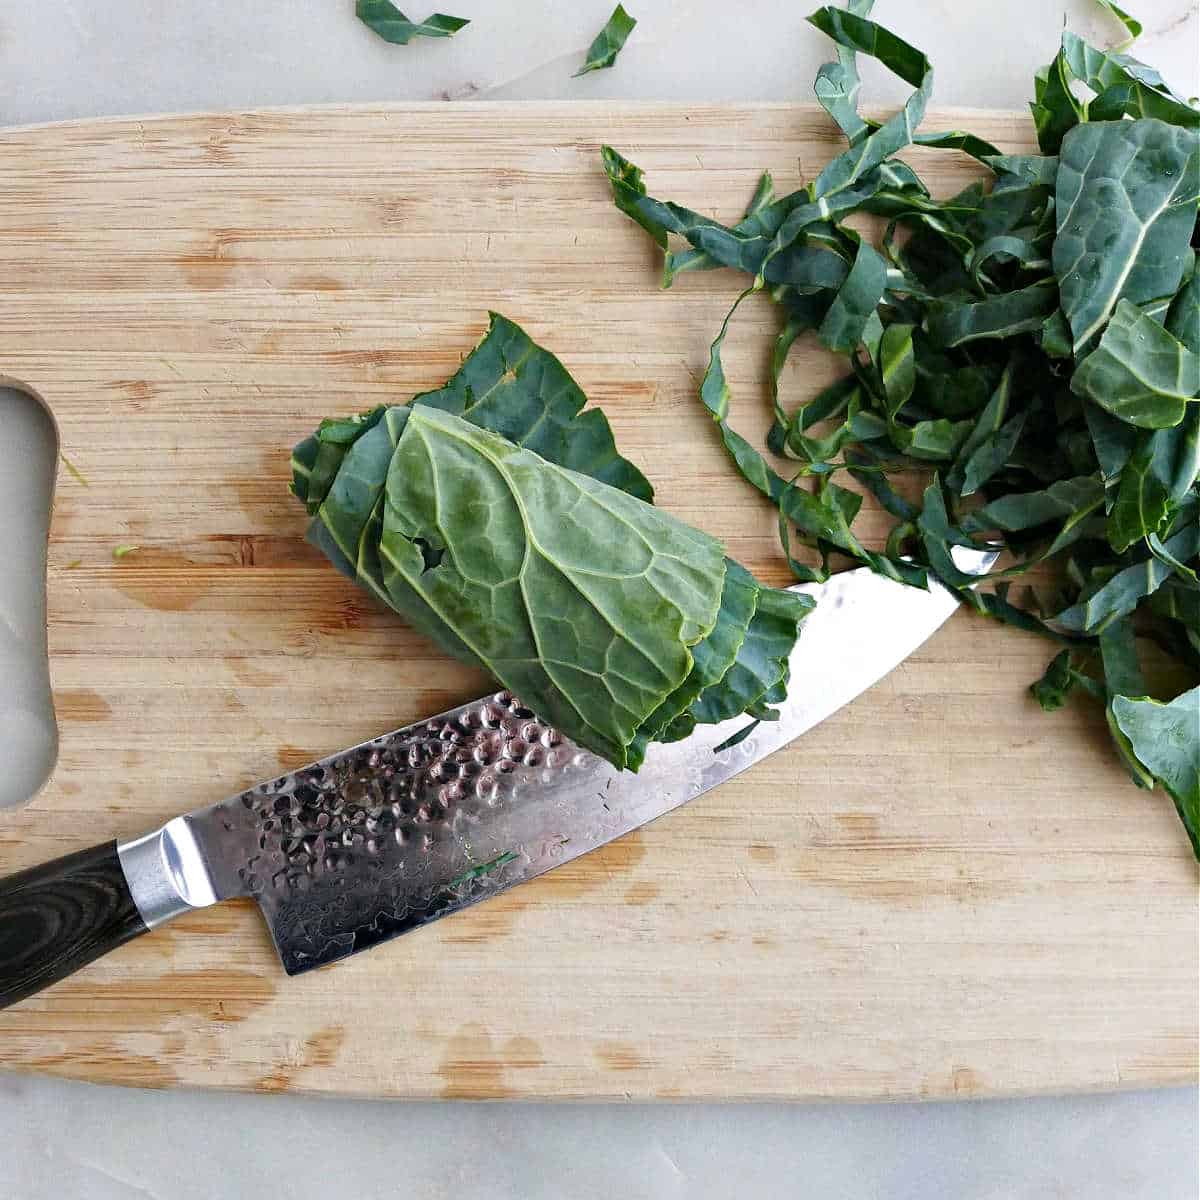 collard greens rolled up on a cutting board with a knife